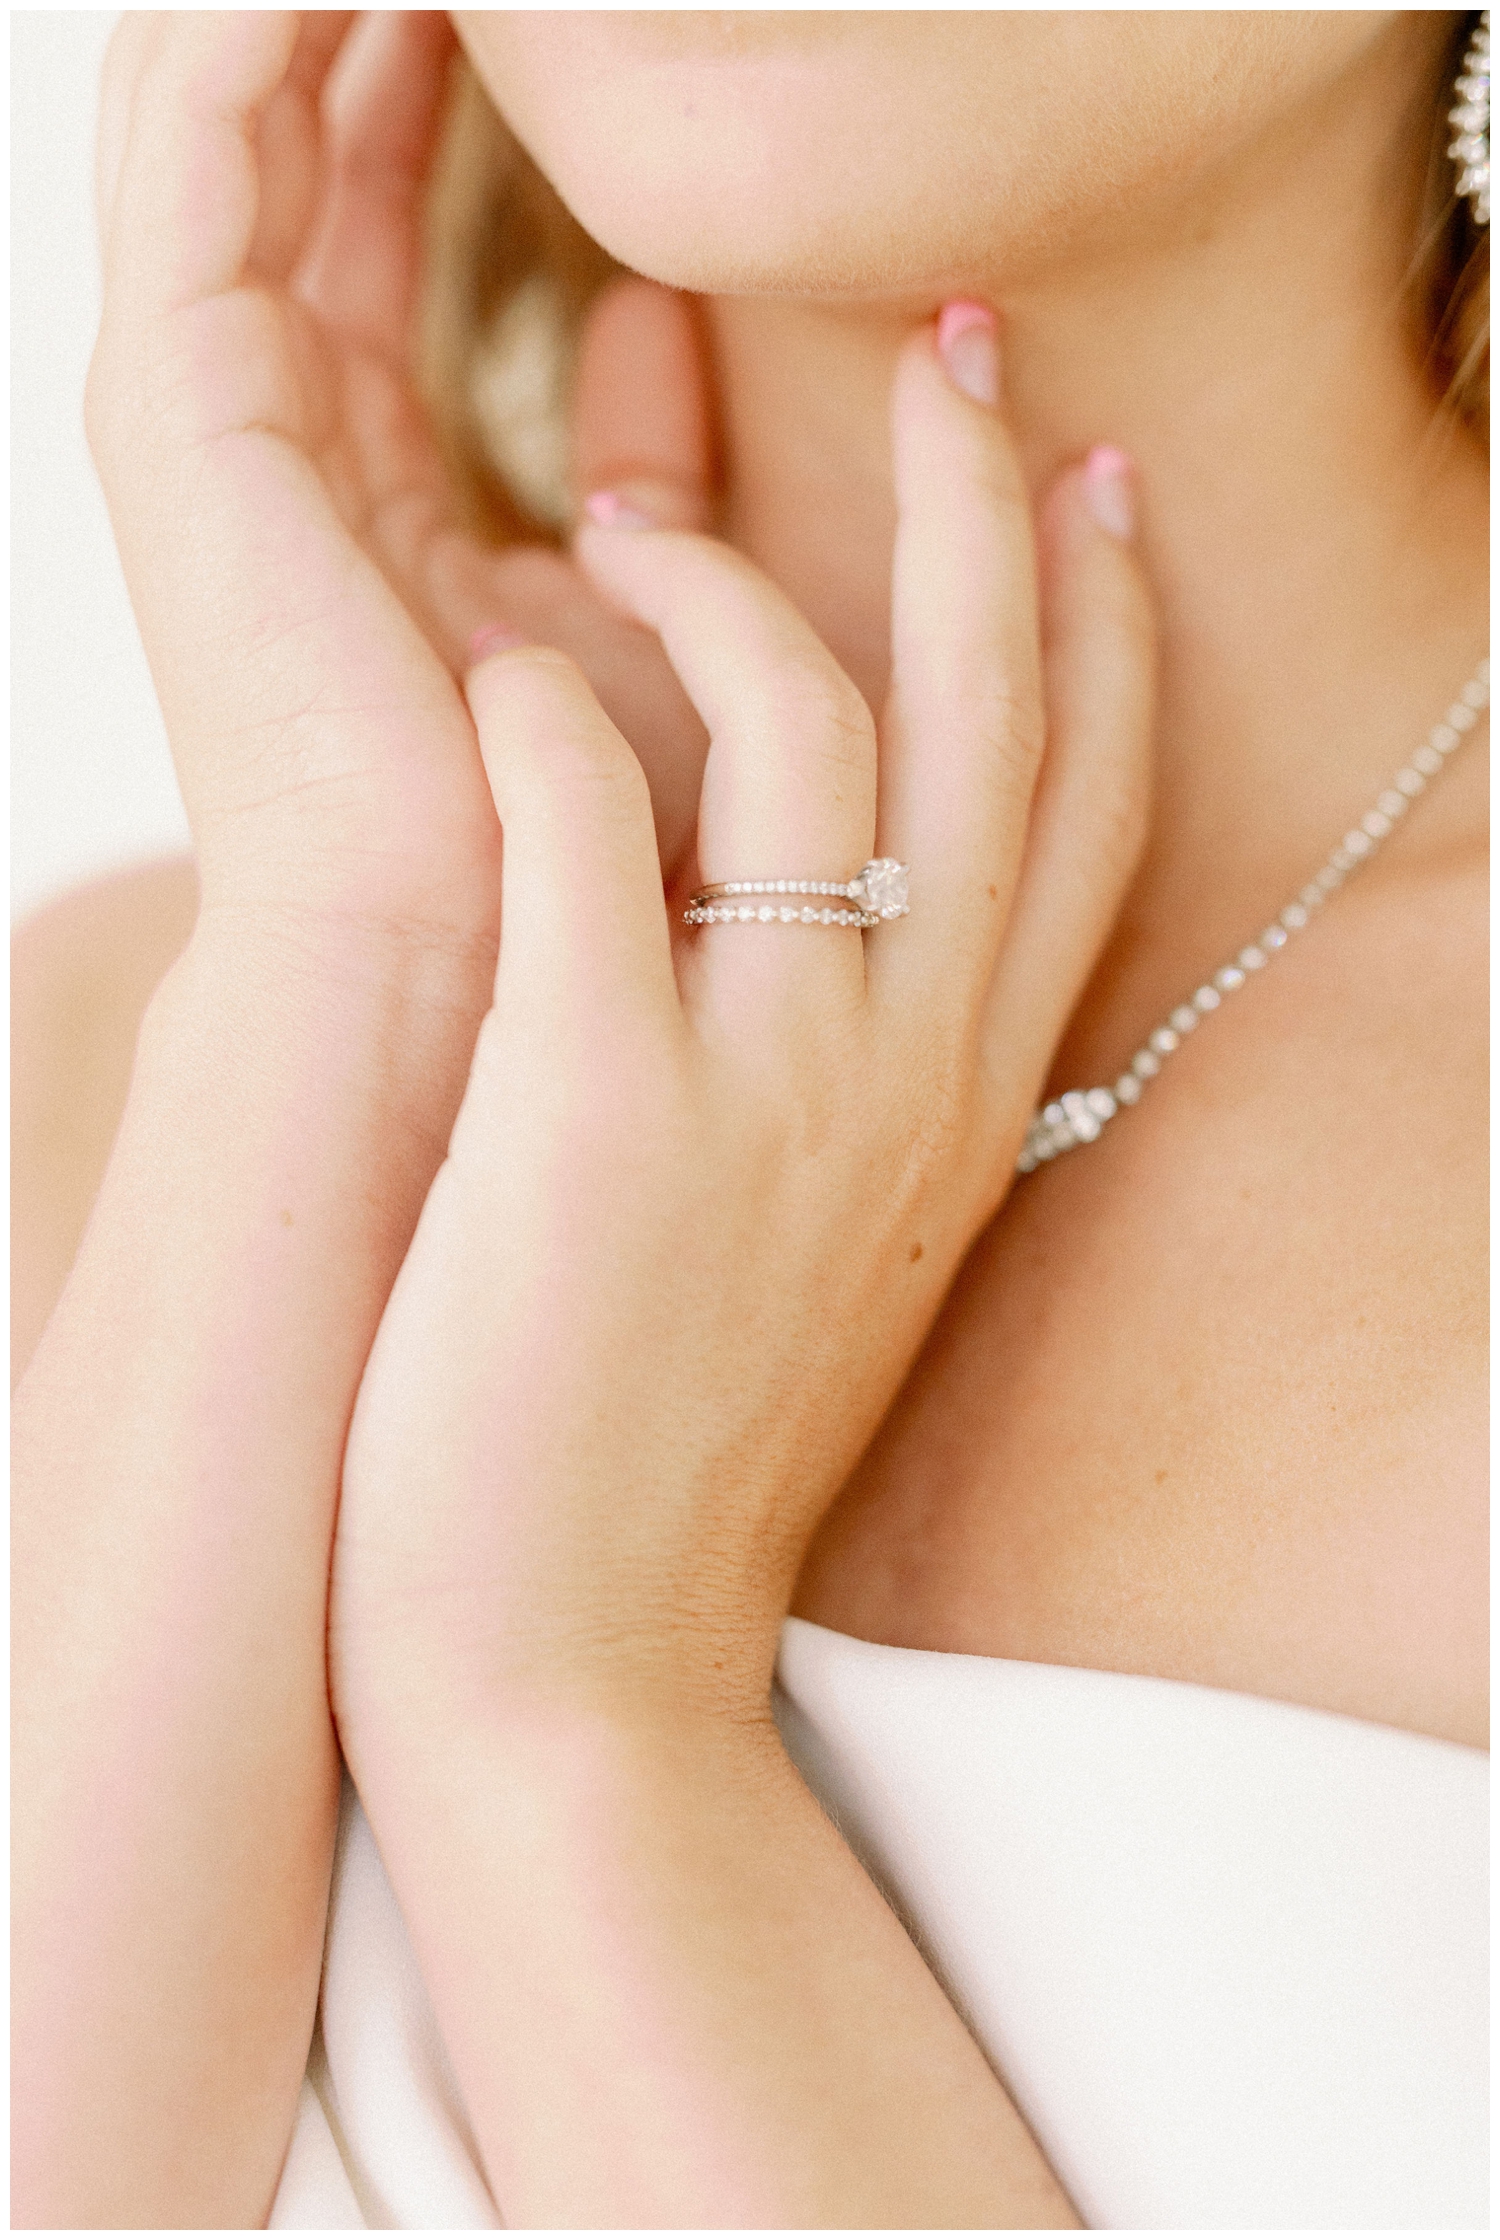 bride's hands clasped together with wedding ring by chin